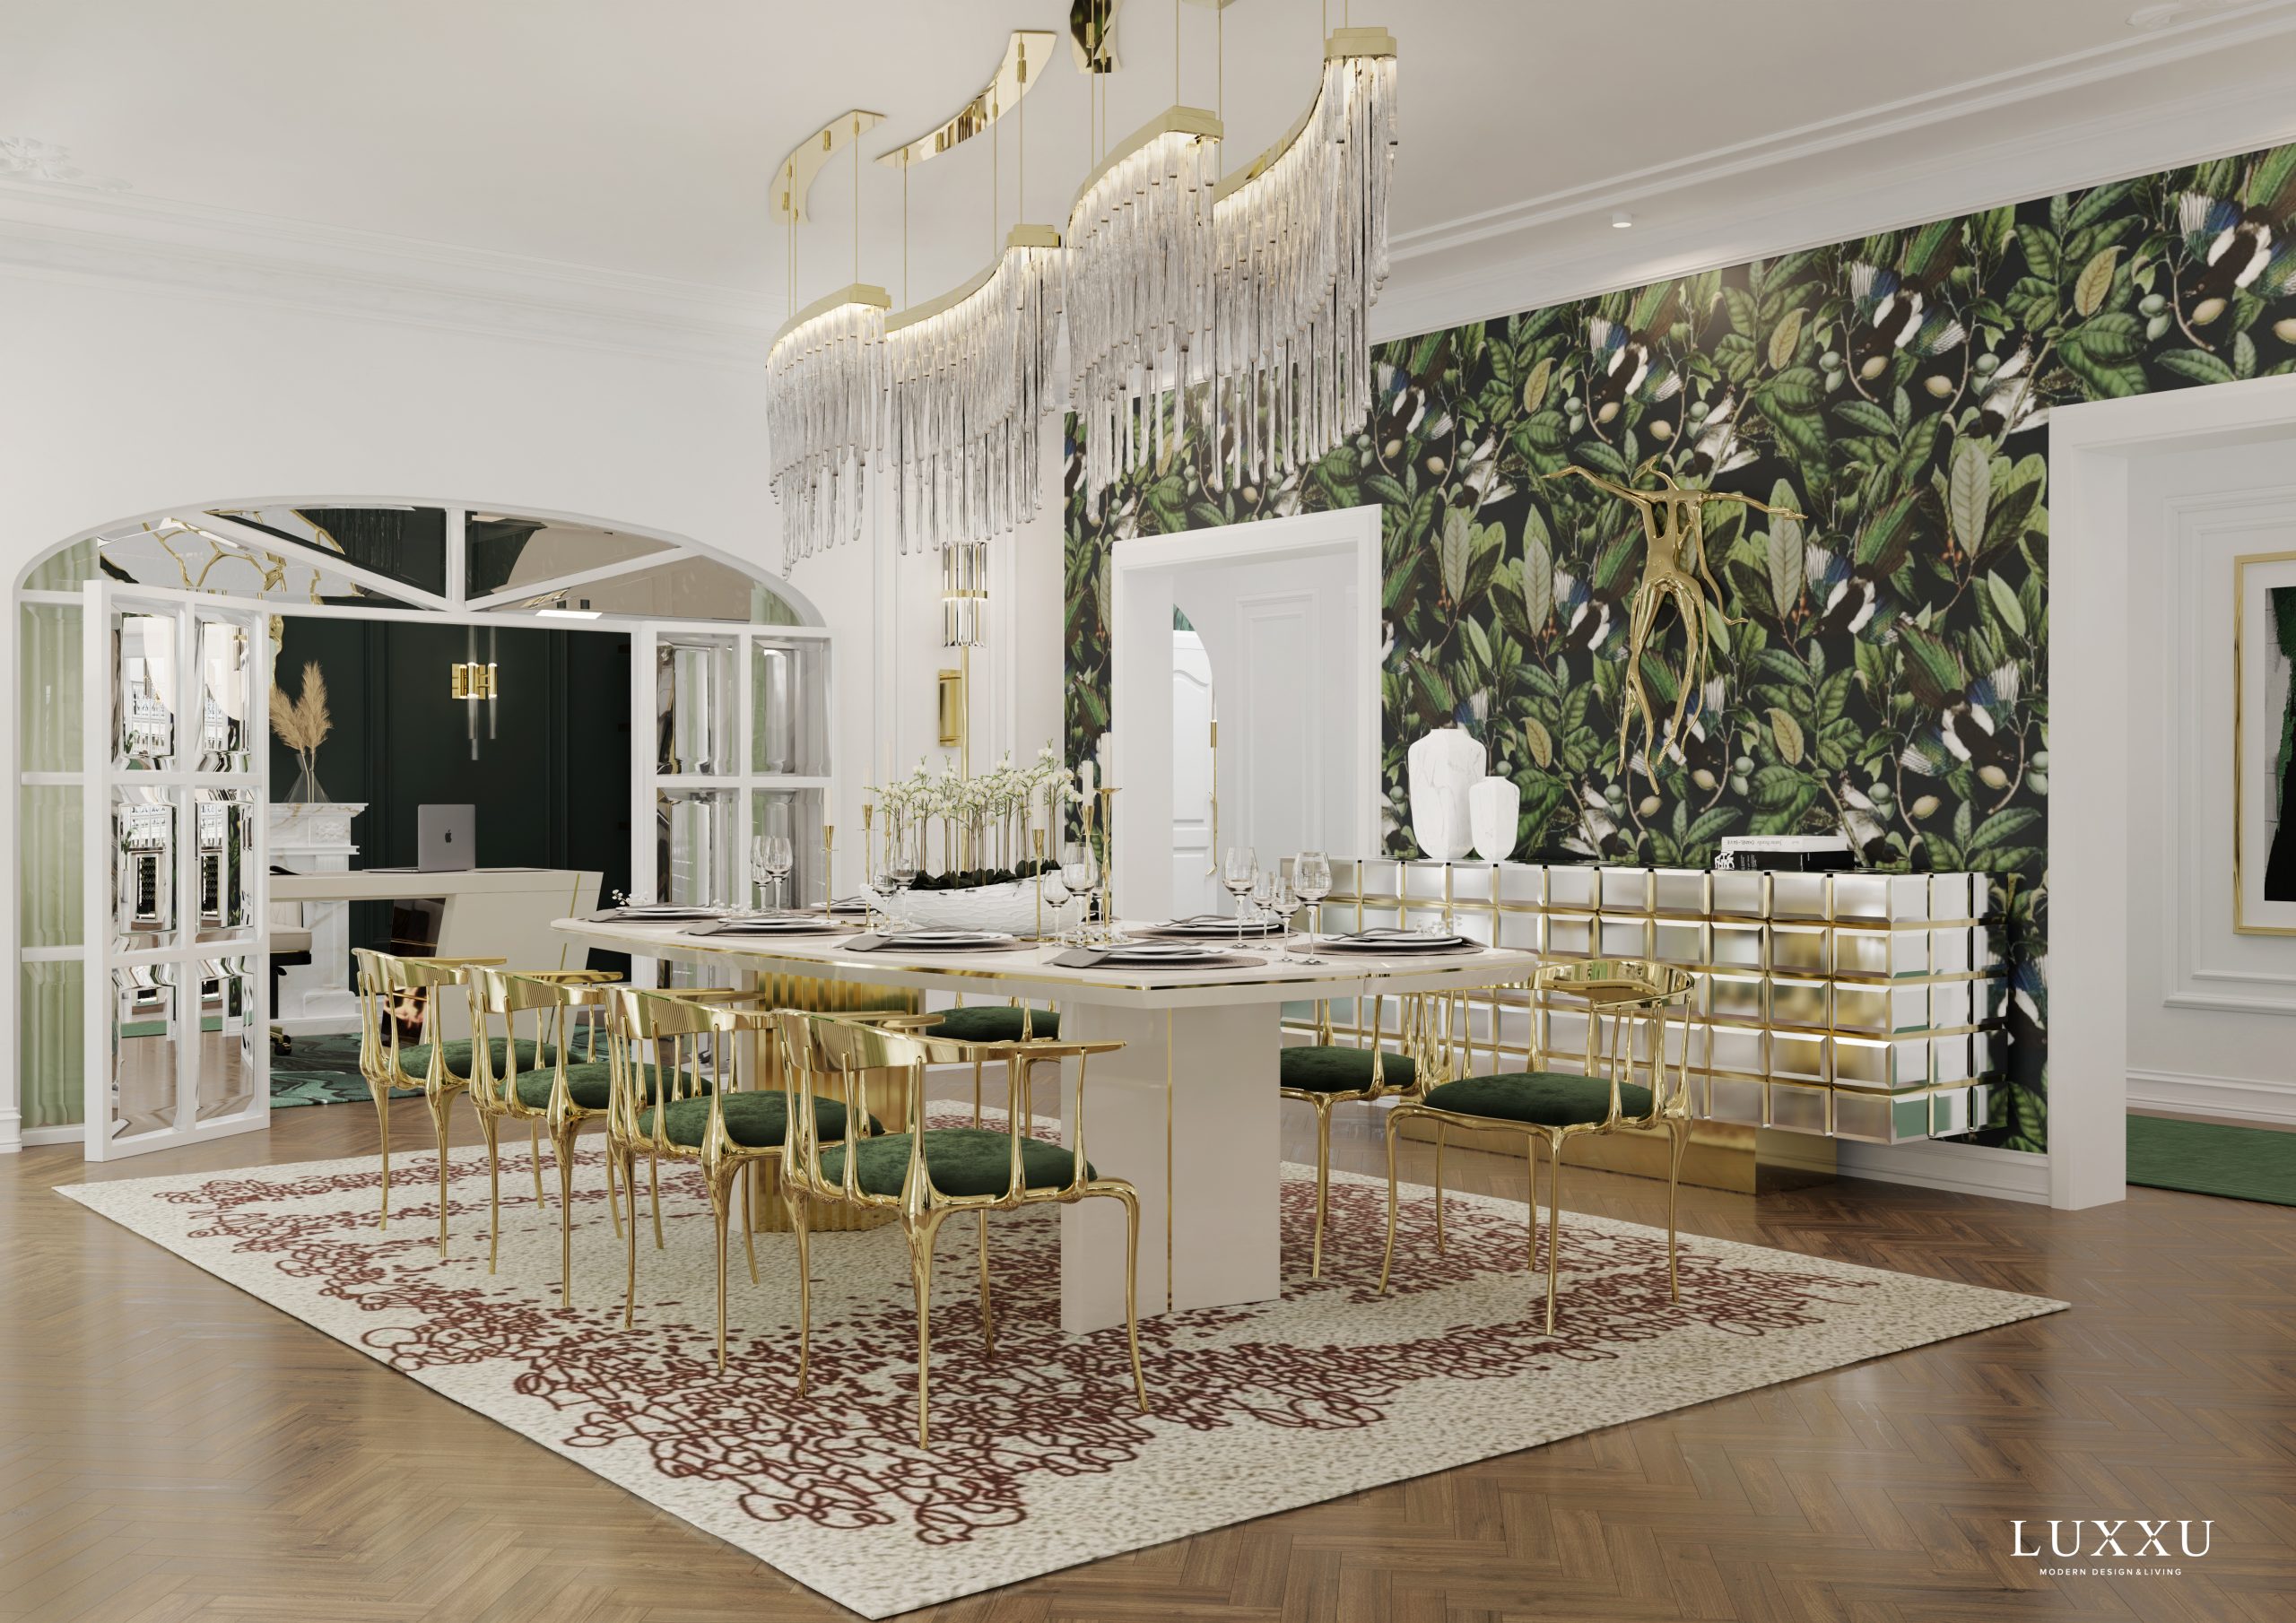 Modern Dining Room Design - The Fine Dining Of Paris With Luxxu